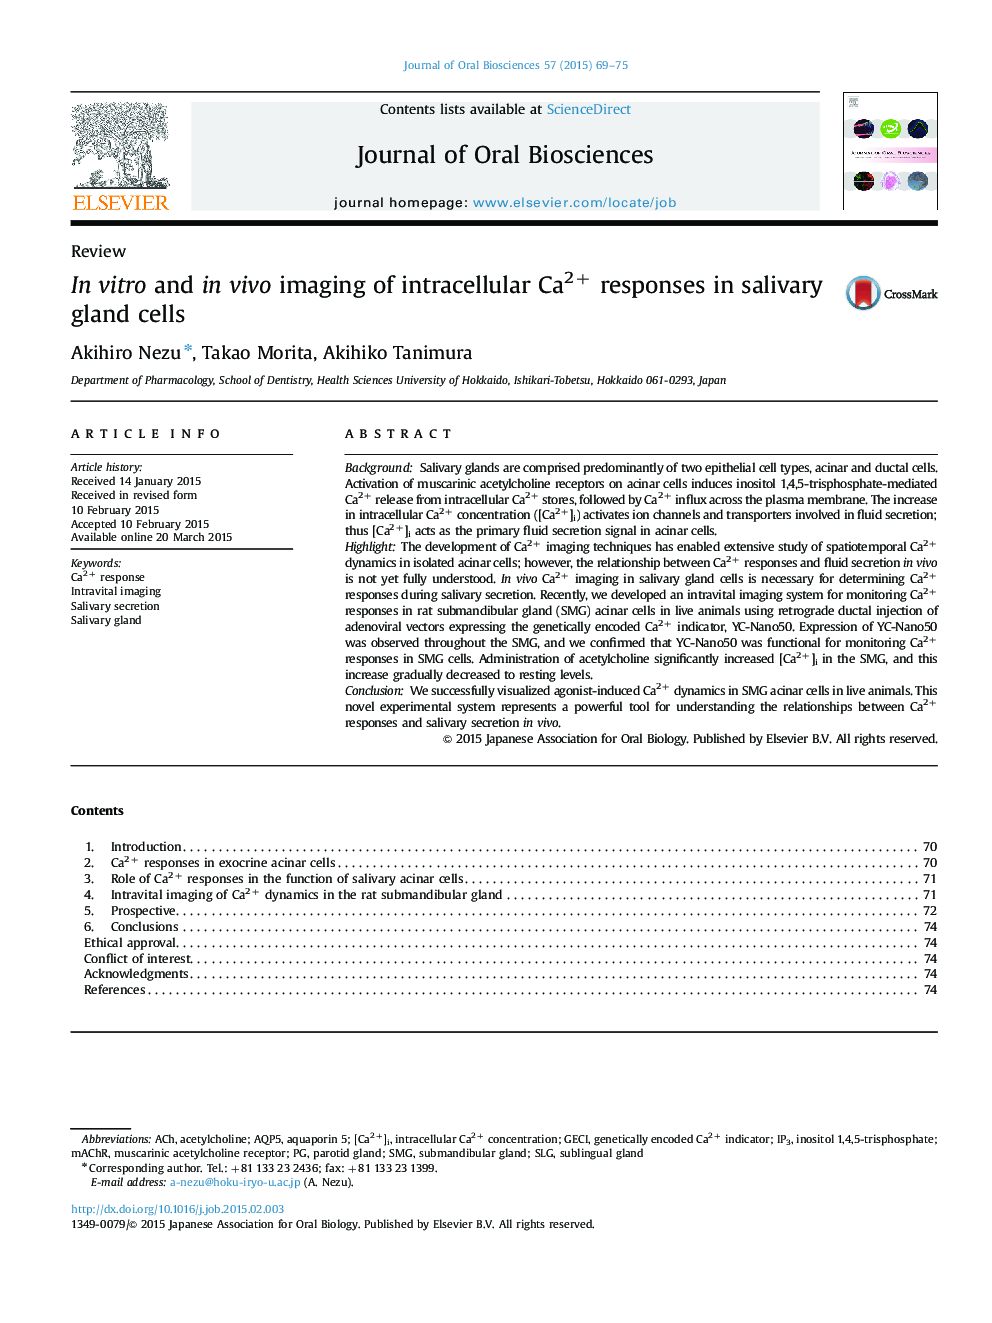 In vitro and in vivo imaging of intracellular Ca2+ responses in salivary gland cells